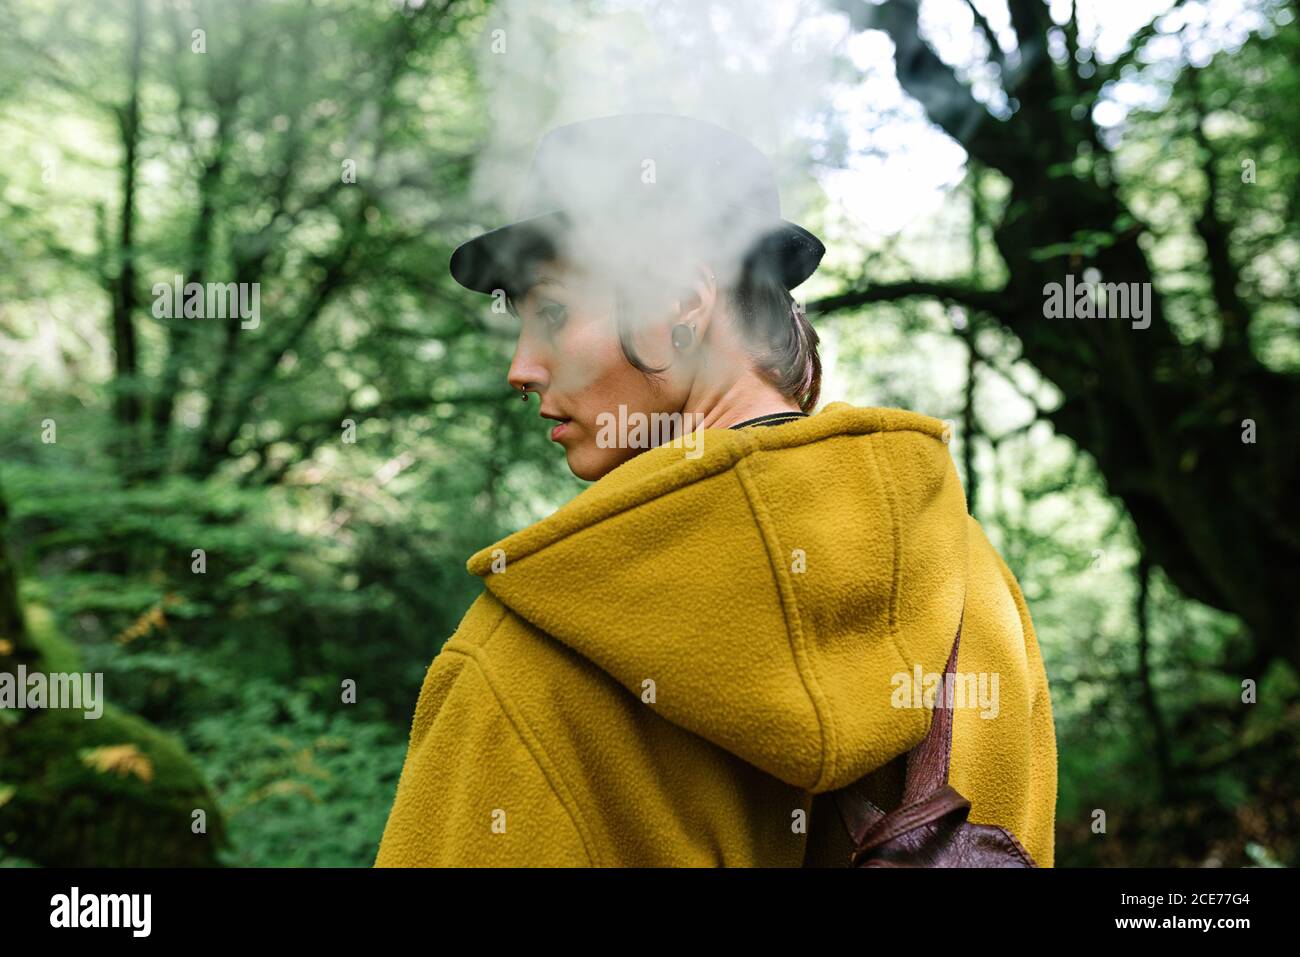 Back view of female traveler with hooded yellow coat exhaling smoke and looking over shoulder on blurred background of green forest Stock Photo